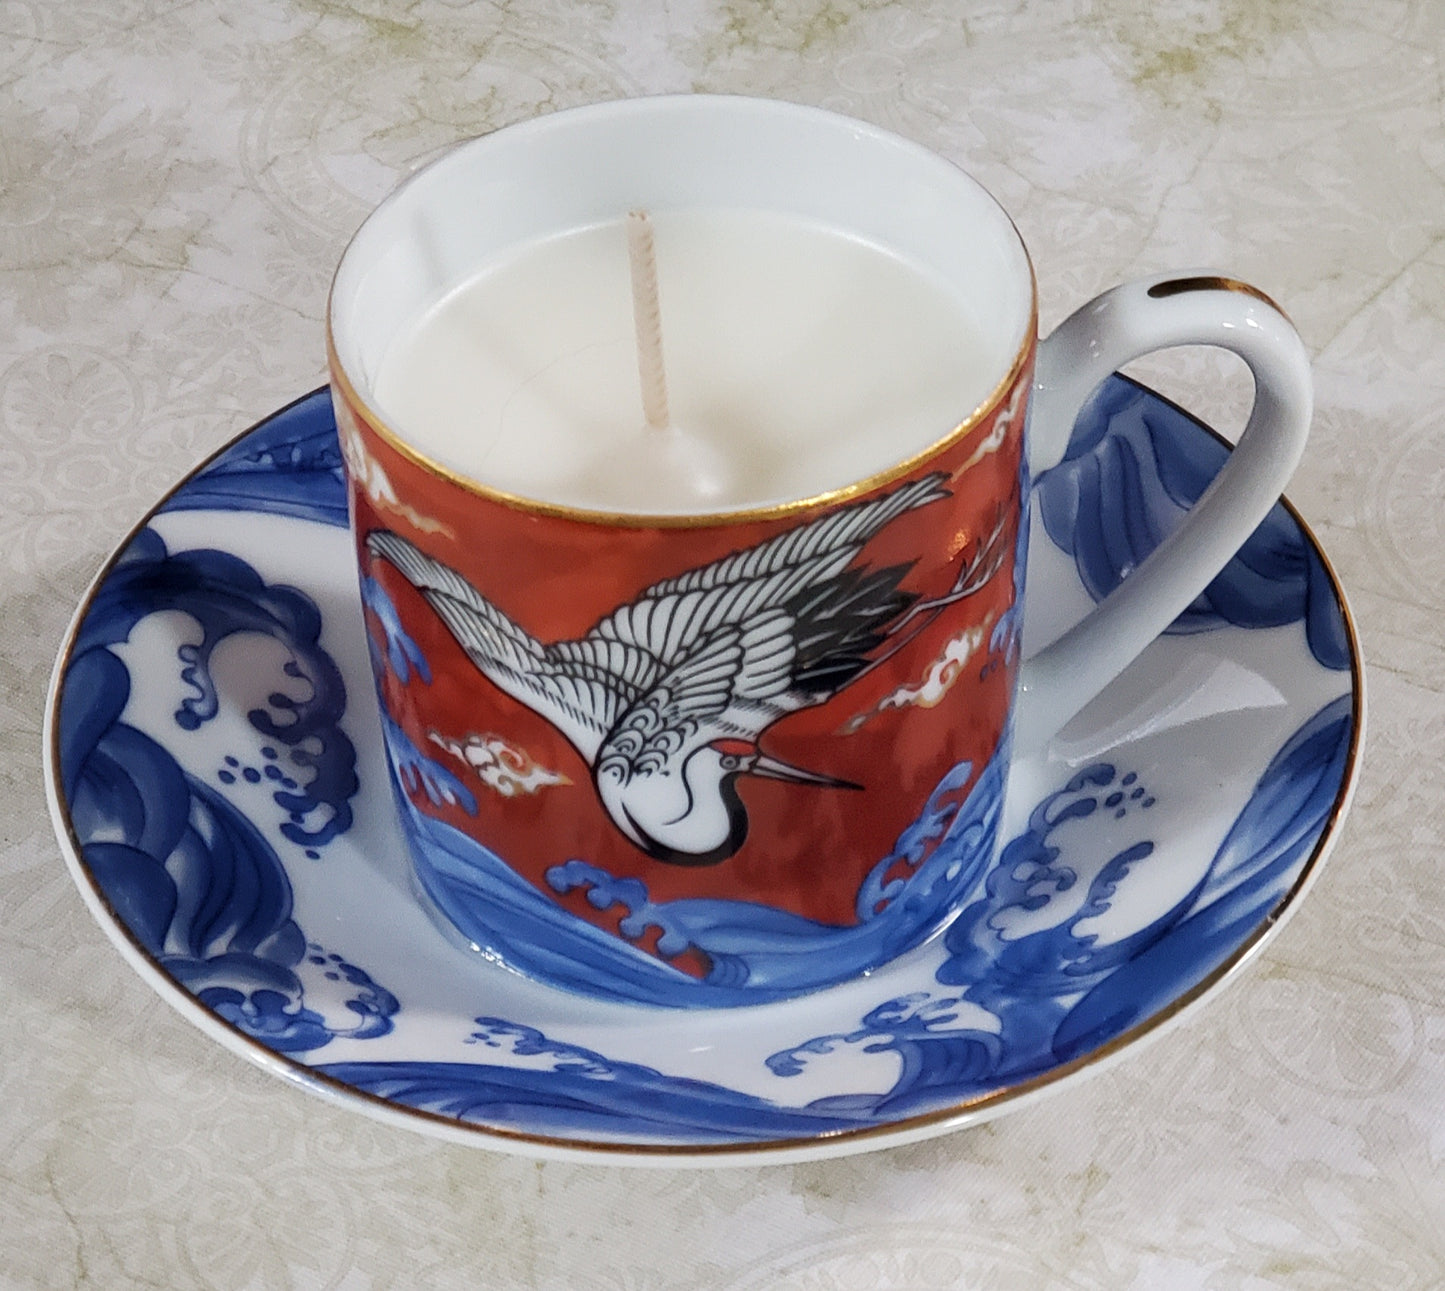 Vintage Cup & Saucer Set - Upcycled Candle